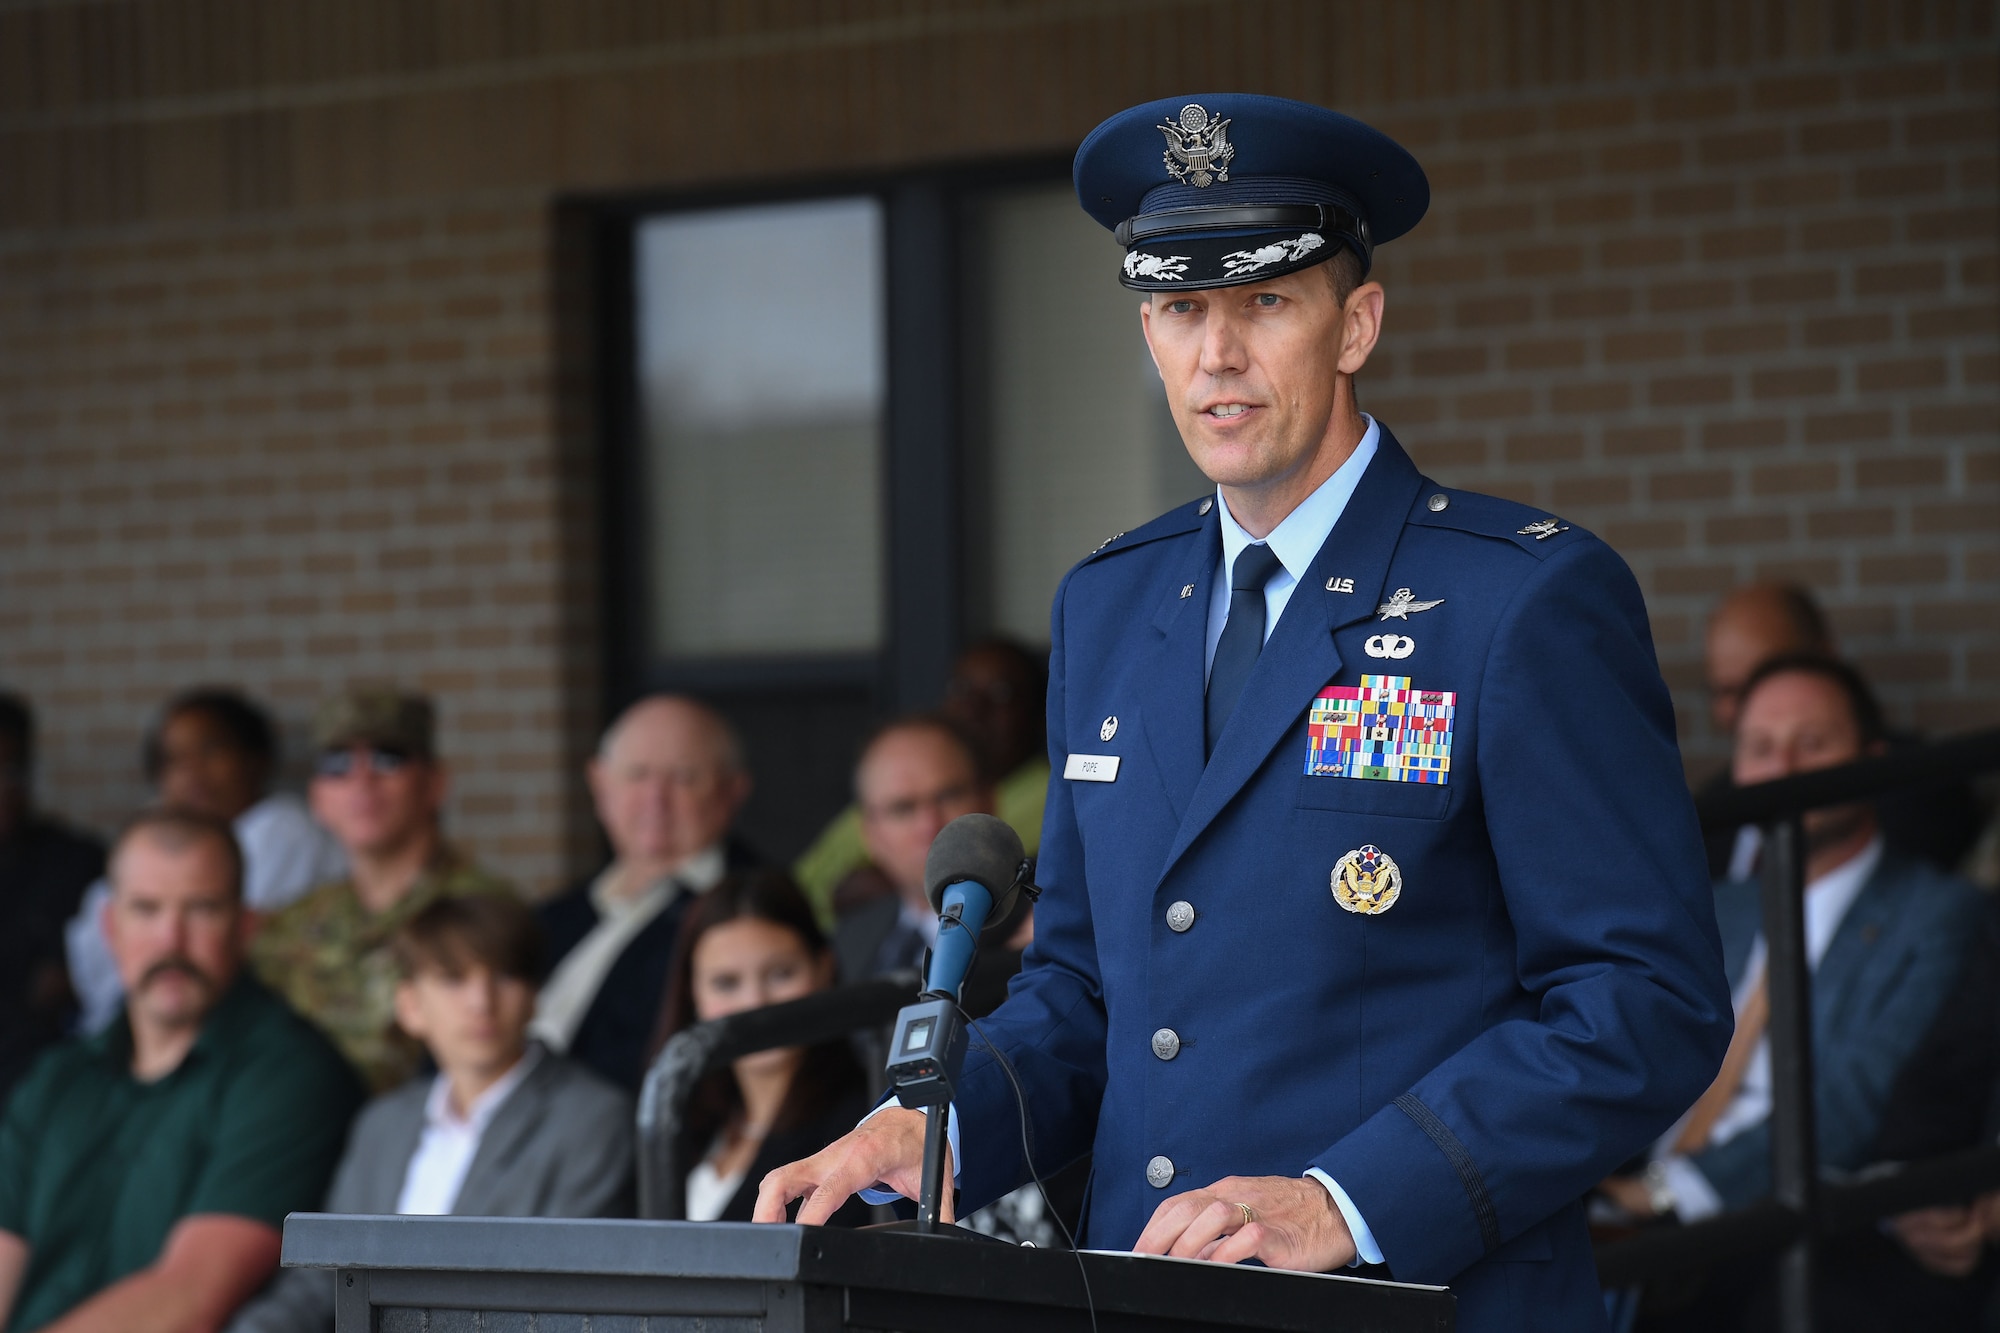 U.S. Air Force Col. Billy Pope, 81st Training Wing commander, delivers remarks during an assumption of command ceremony on the Levitow Training Support Facility drill pad at Keesler Air Force Base, Mississippi, March 23, 2023.